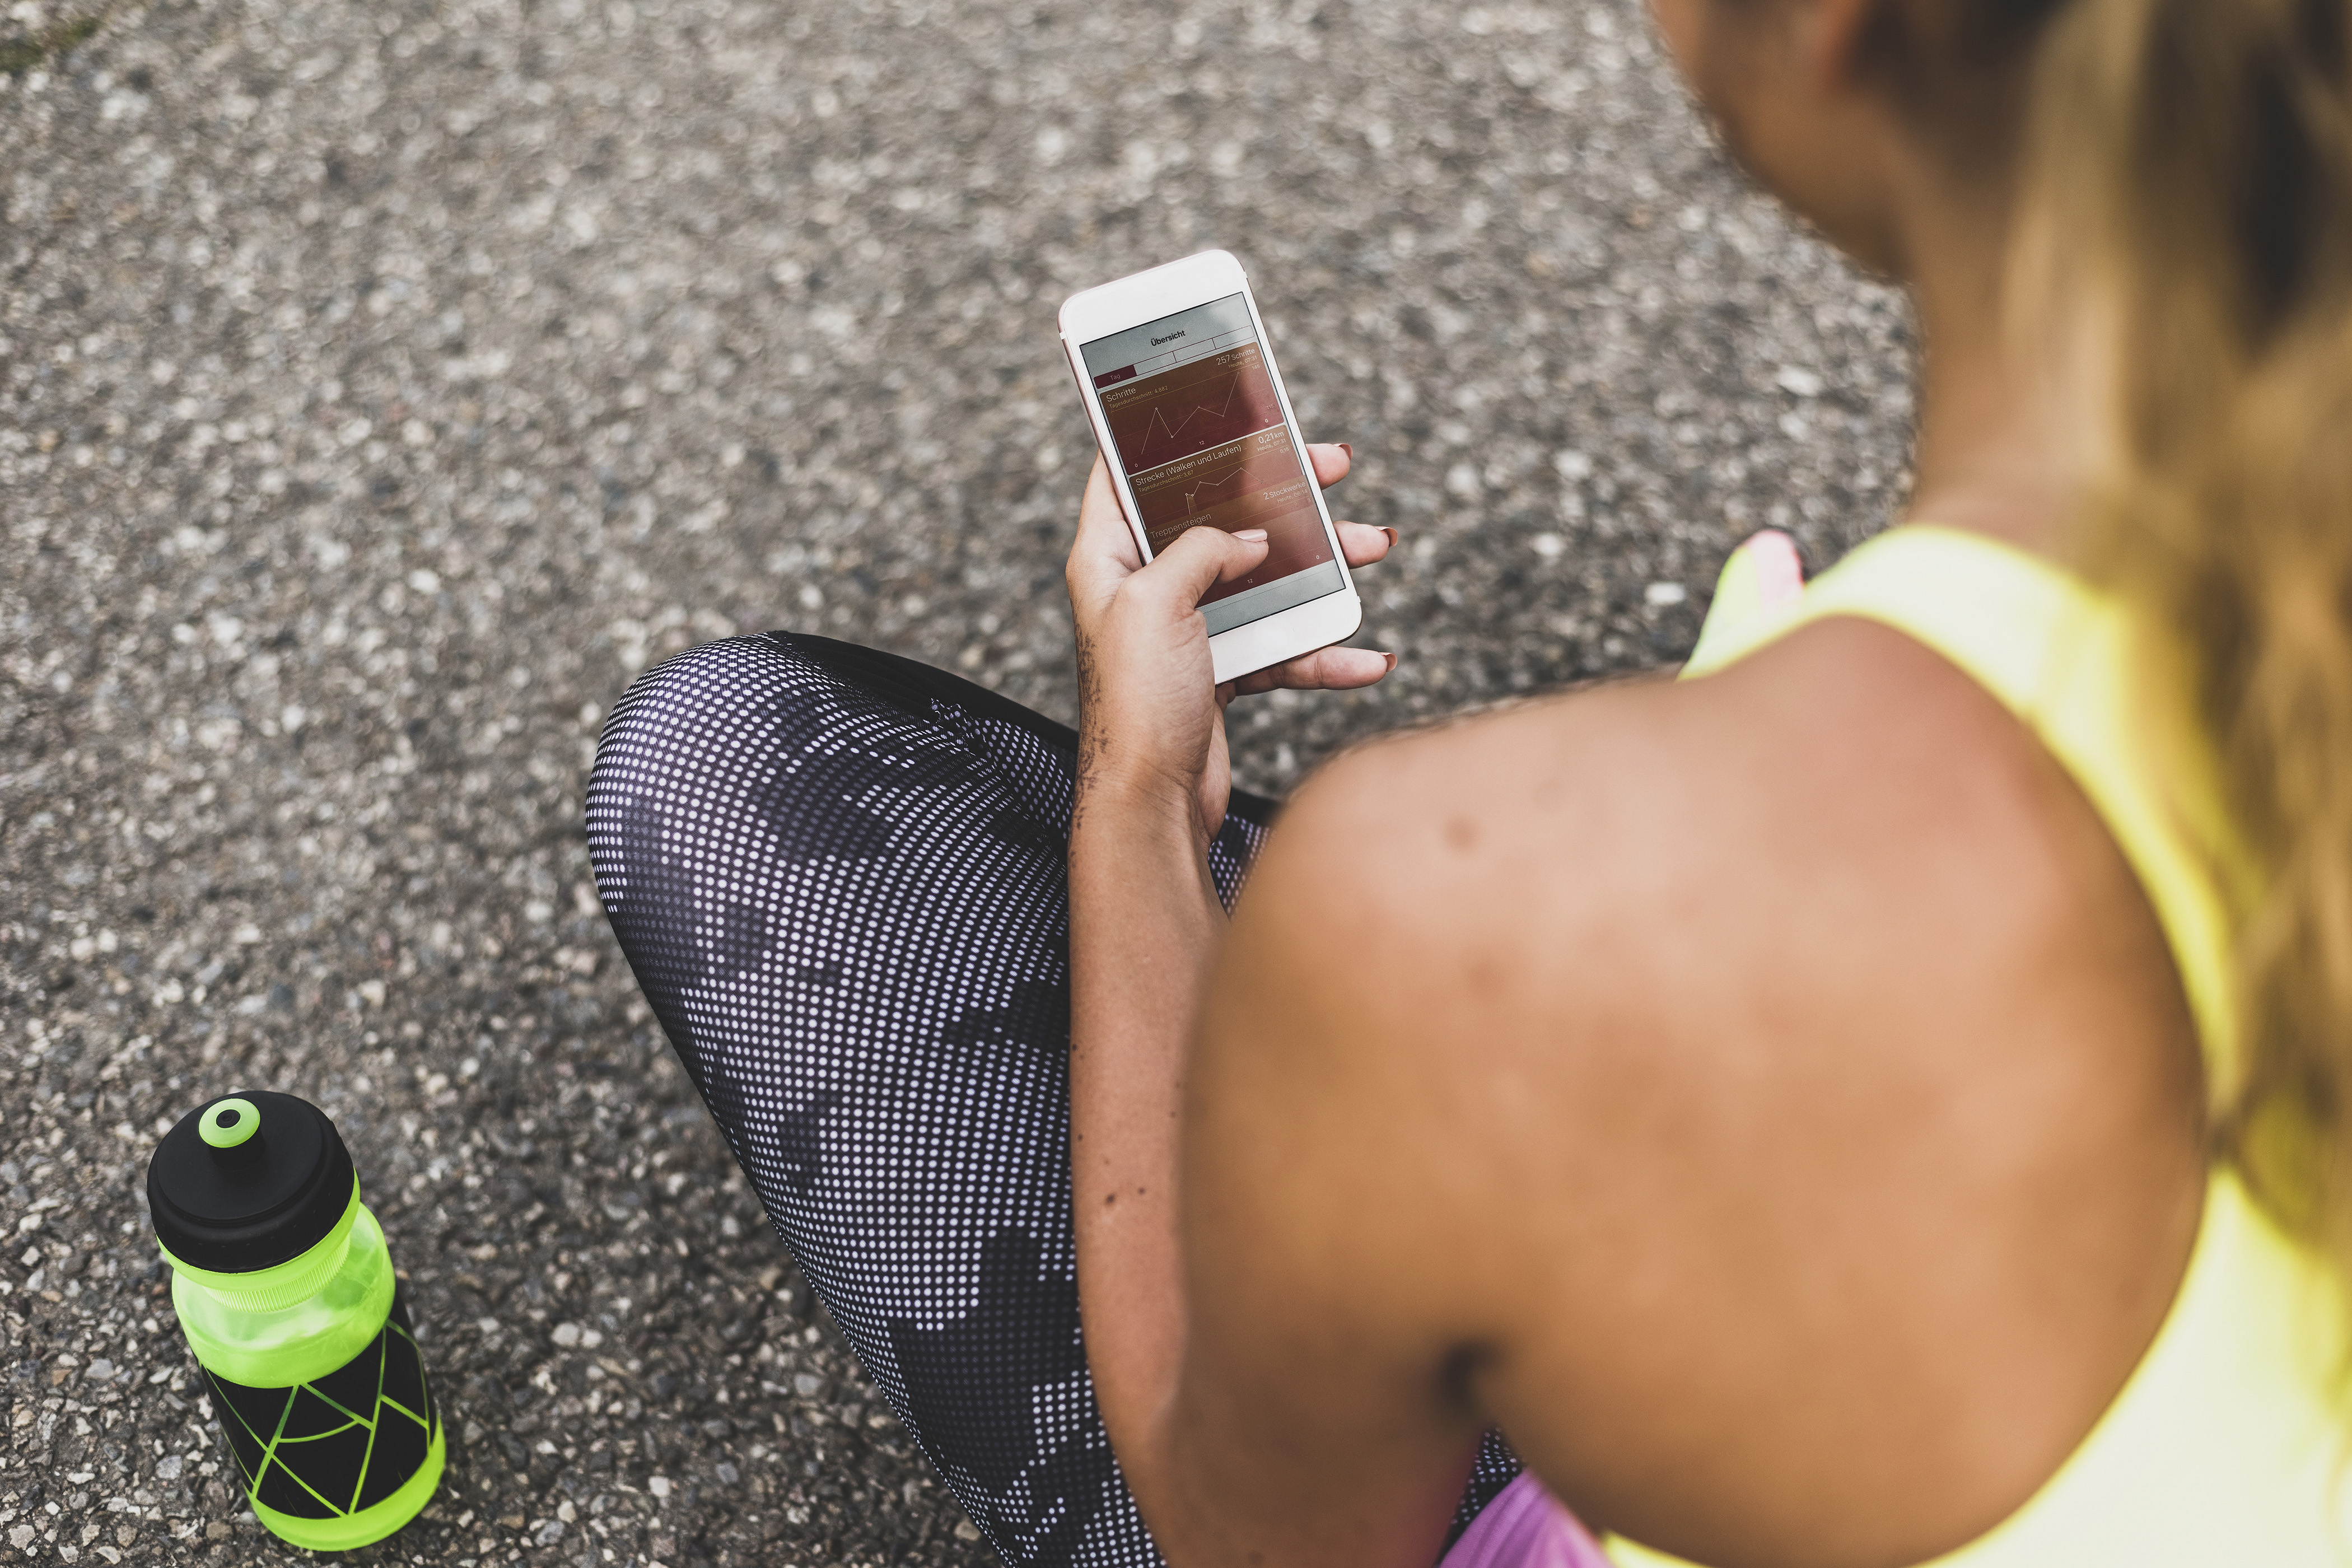 A young woman in exercise attire looks at health information on her cell phone. (Getty Images)